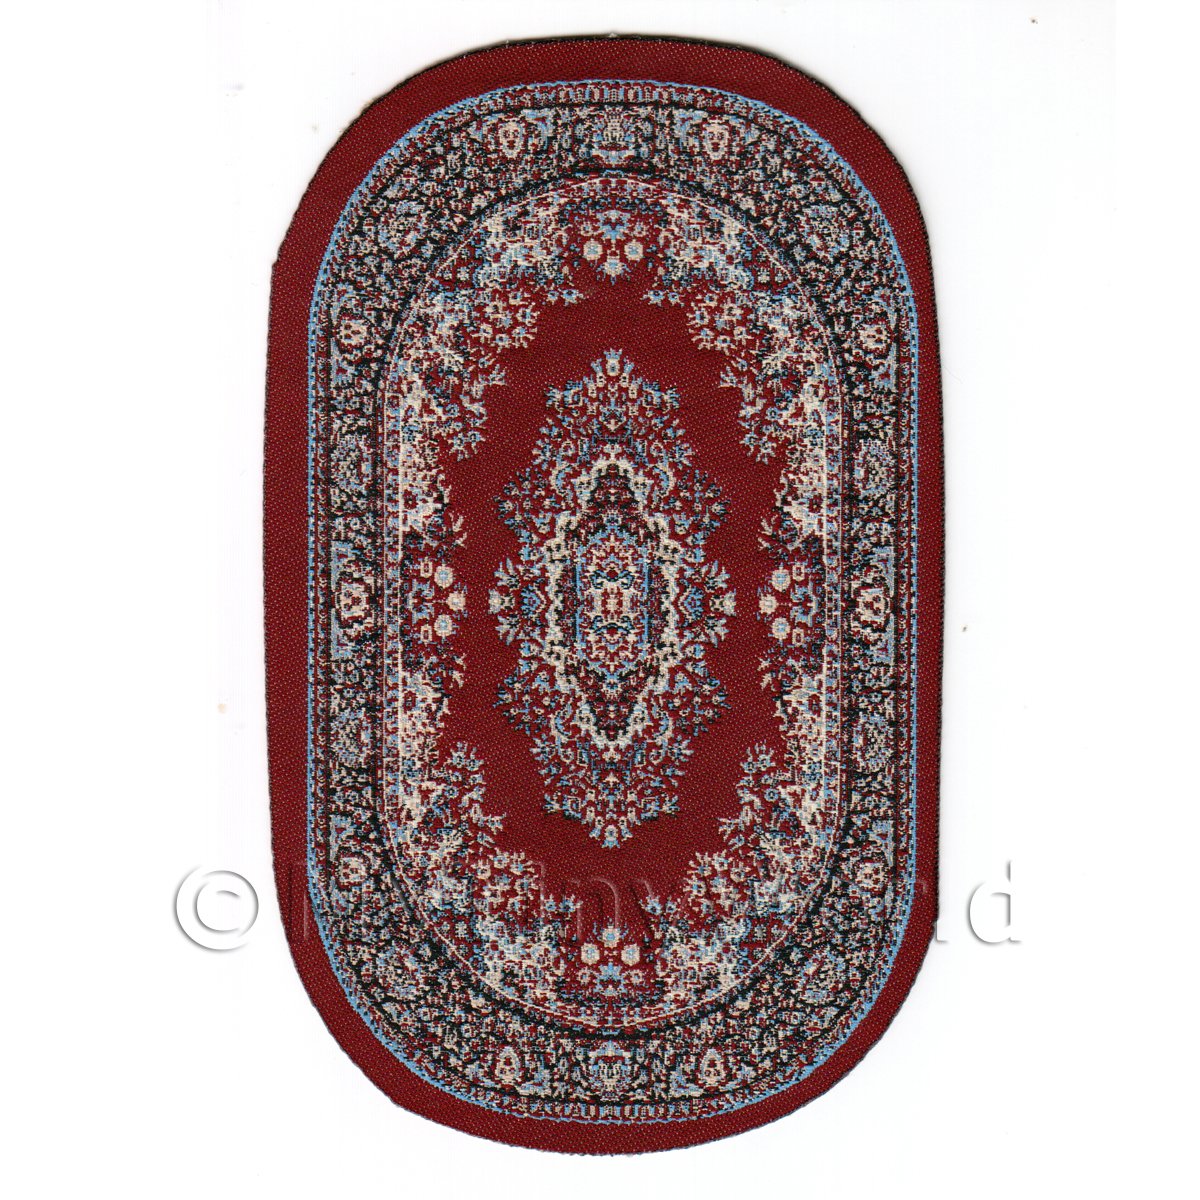 Dolls House Small Oval 18th Century Carpet 18NSO04 Rug 